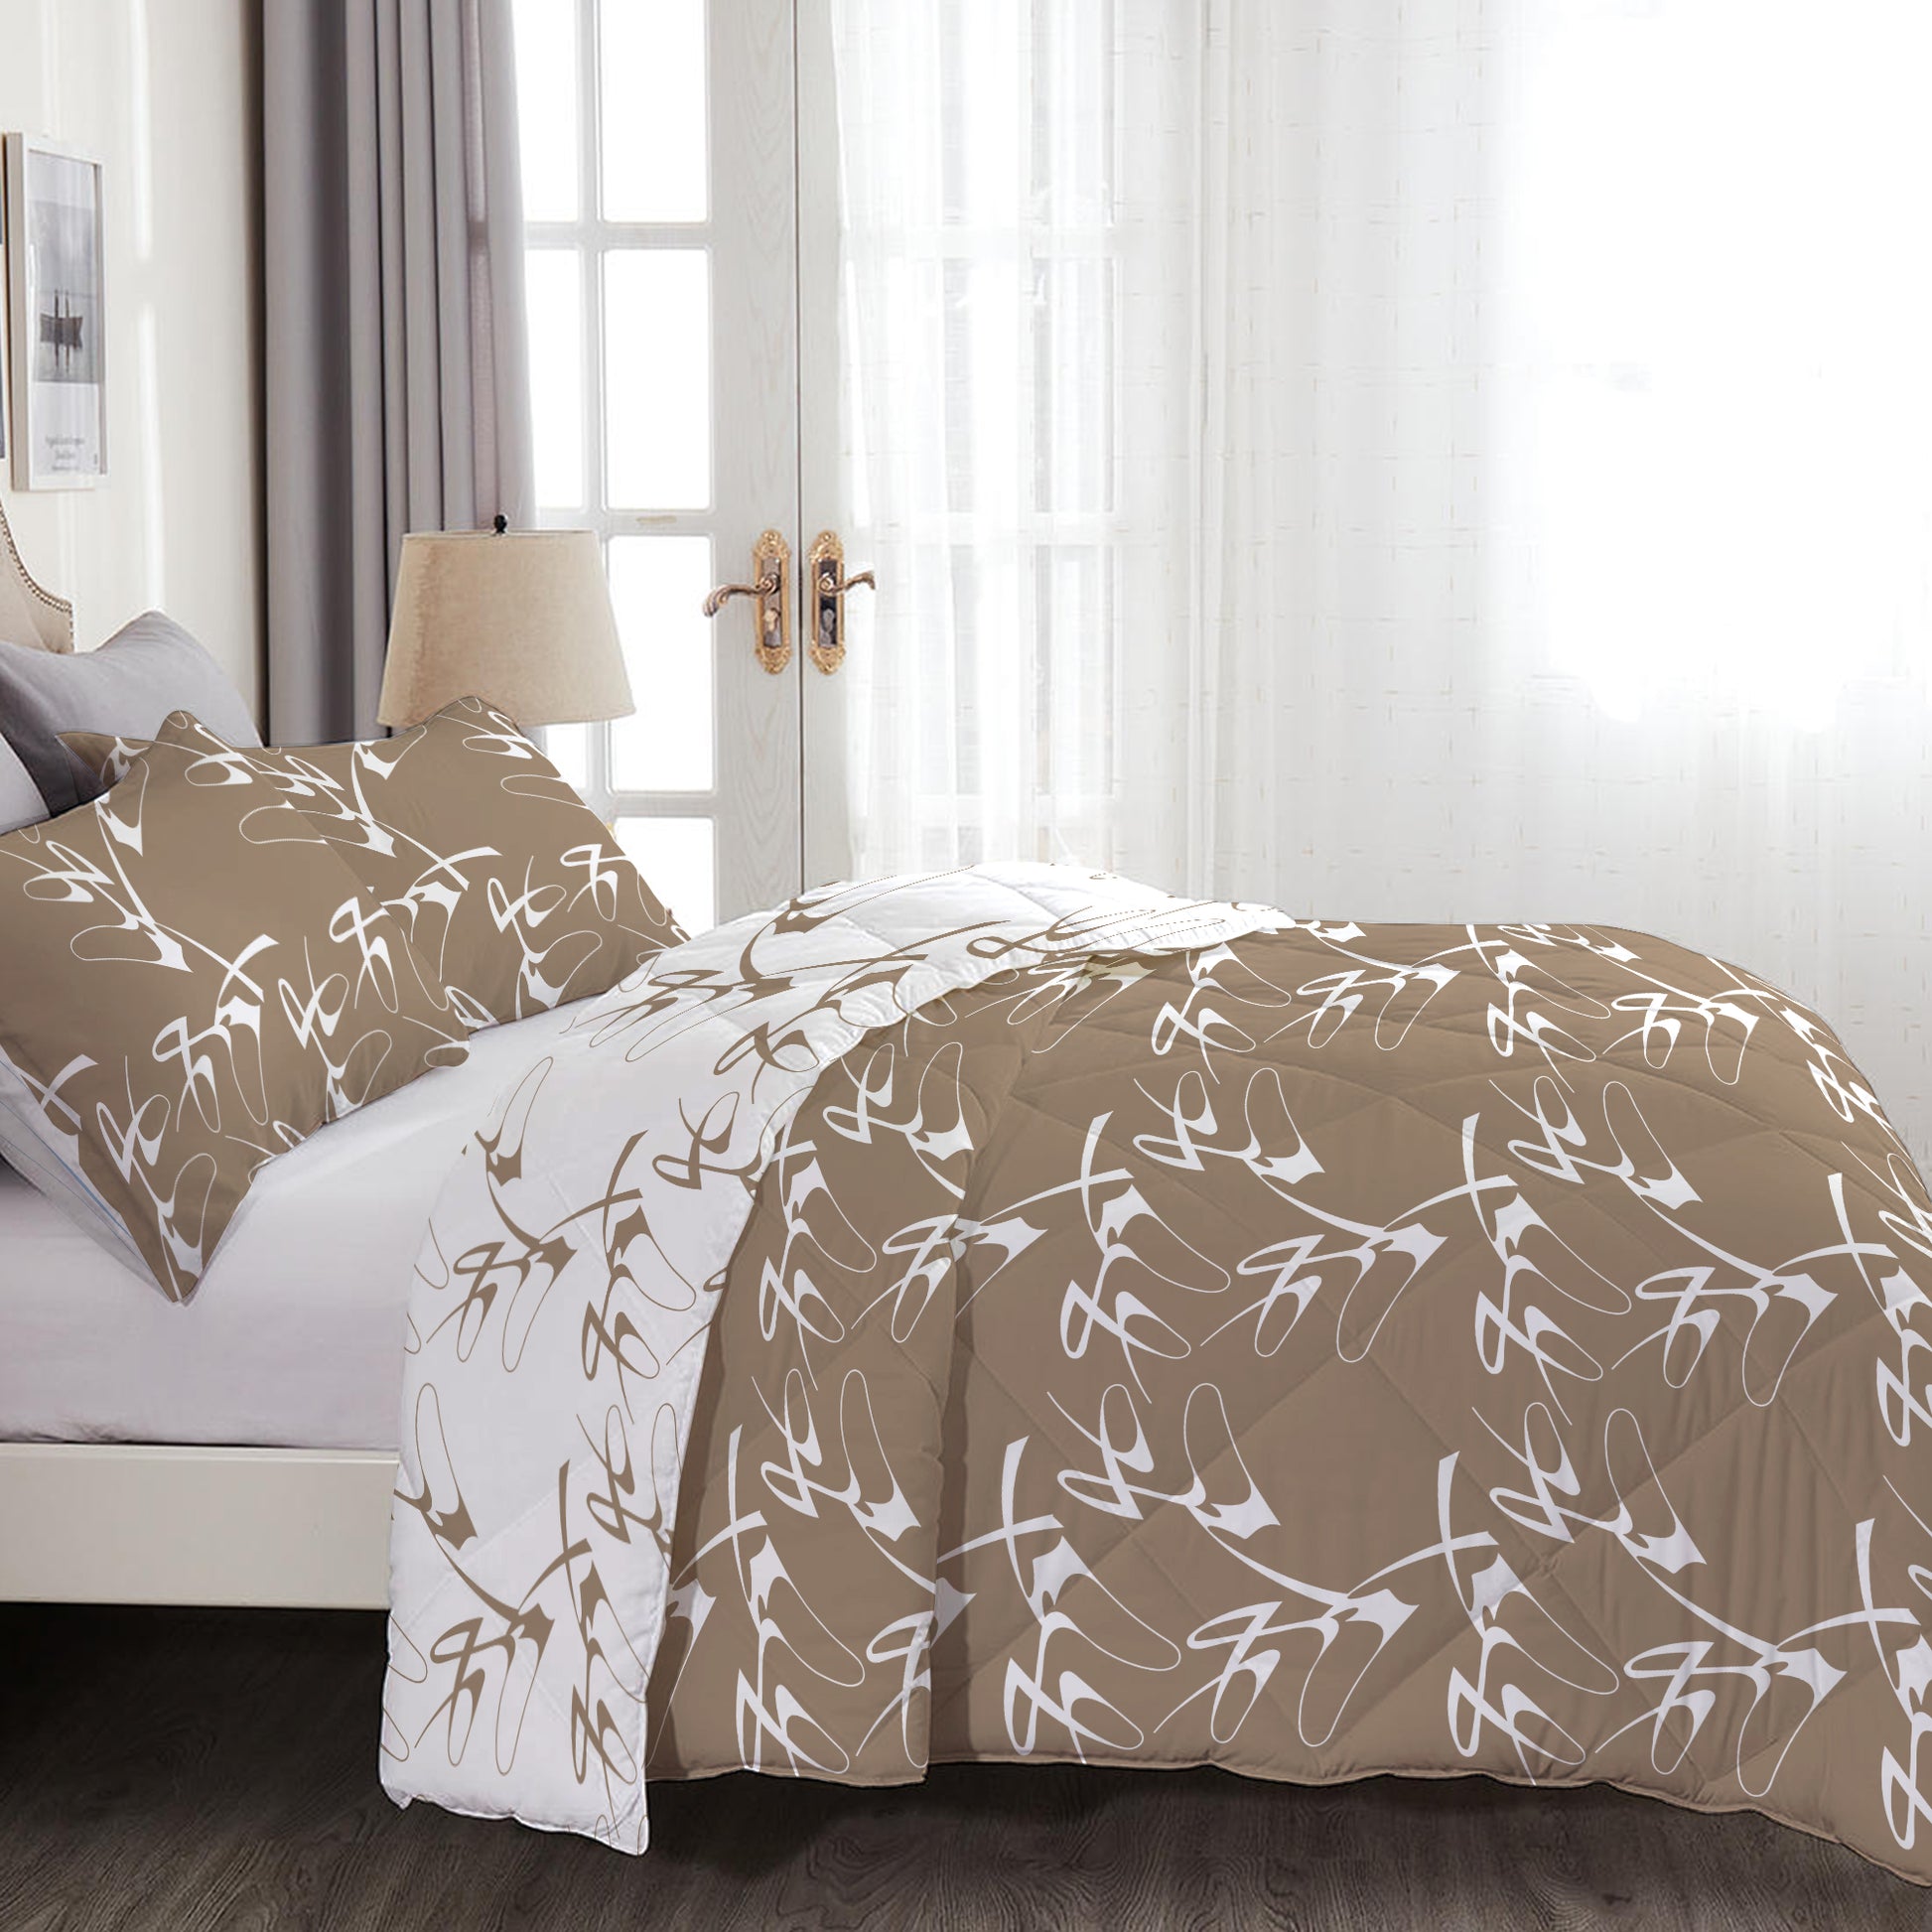 4-Piece Luxury Cotton Comforter Set Queen/King Size Abstract Stroke